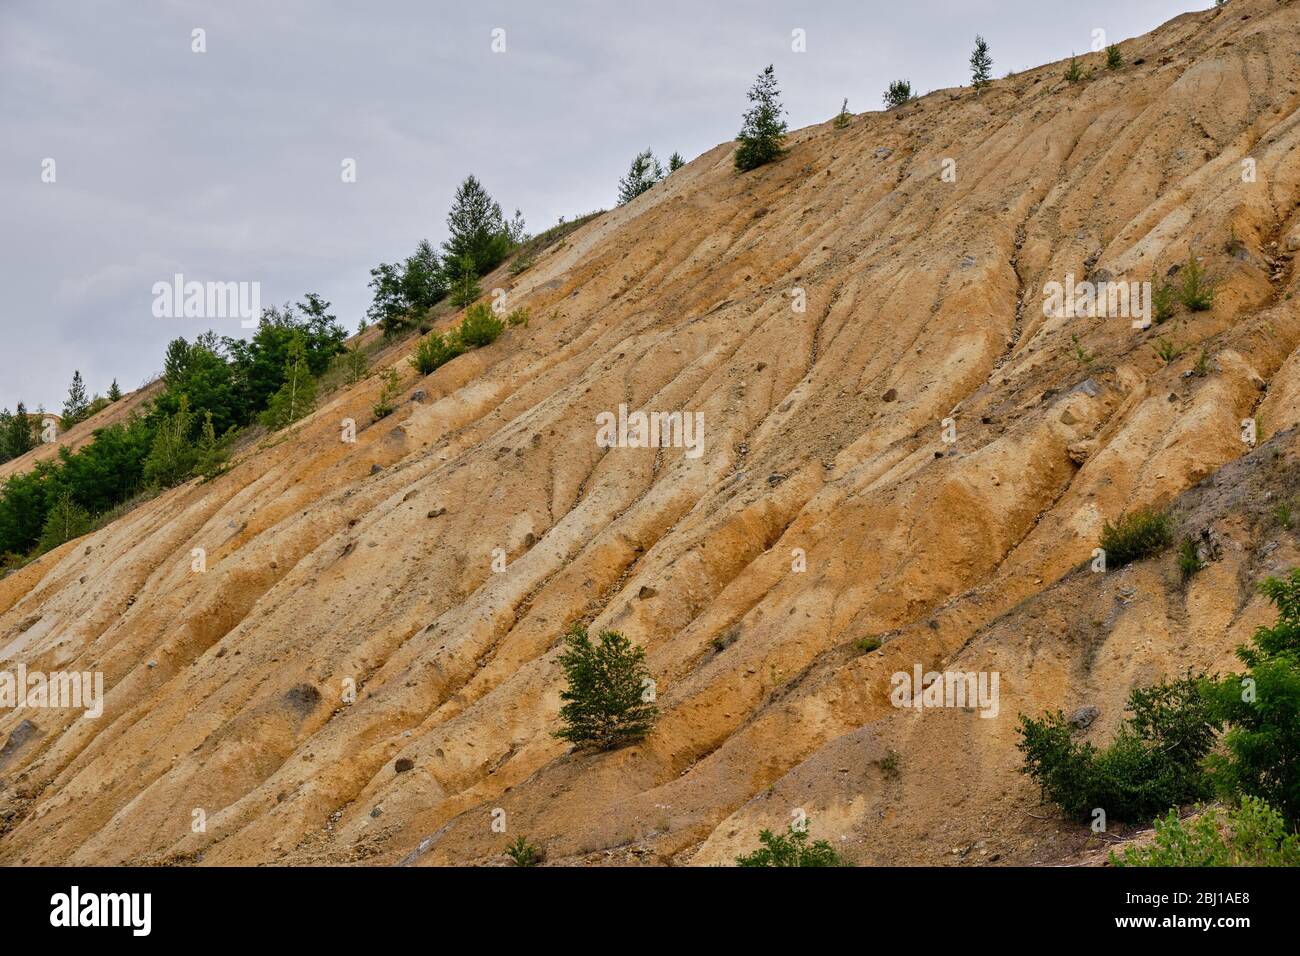 Bor / Serbia - July 13, 2019: Soil erosion and degradation due to industrial pollution in copper mine in Bor, Serbia, owned by Chinese mining company Stock Photo